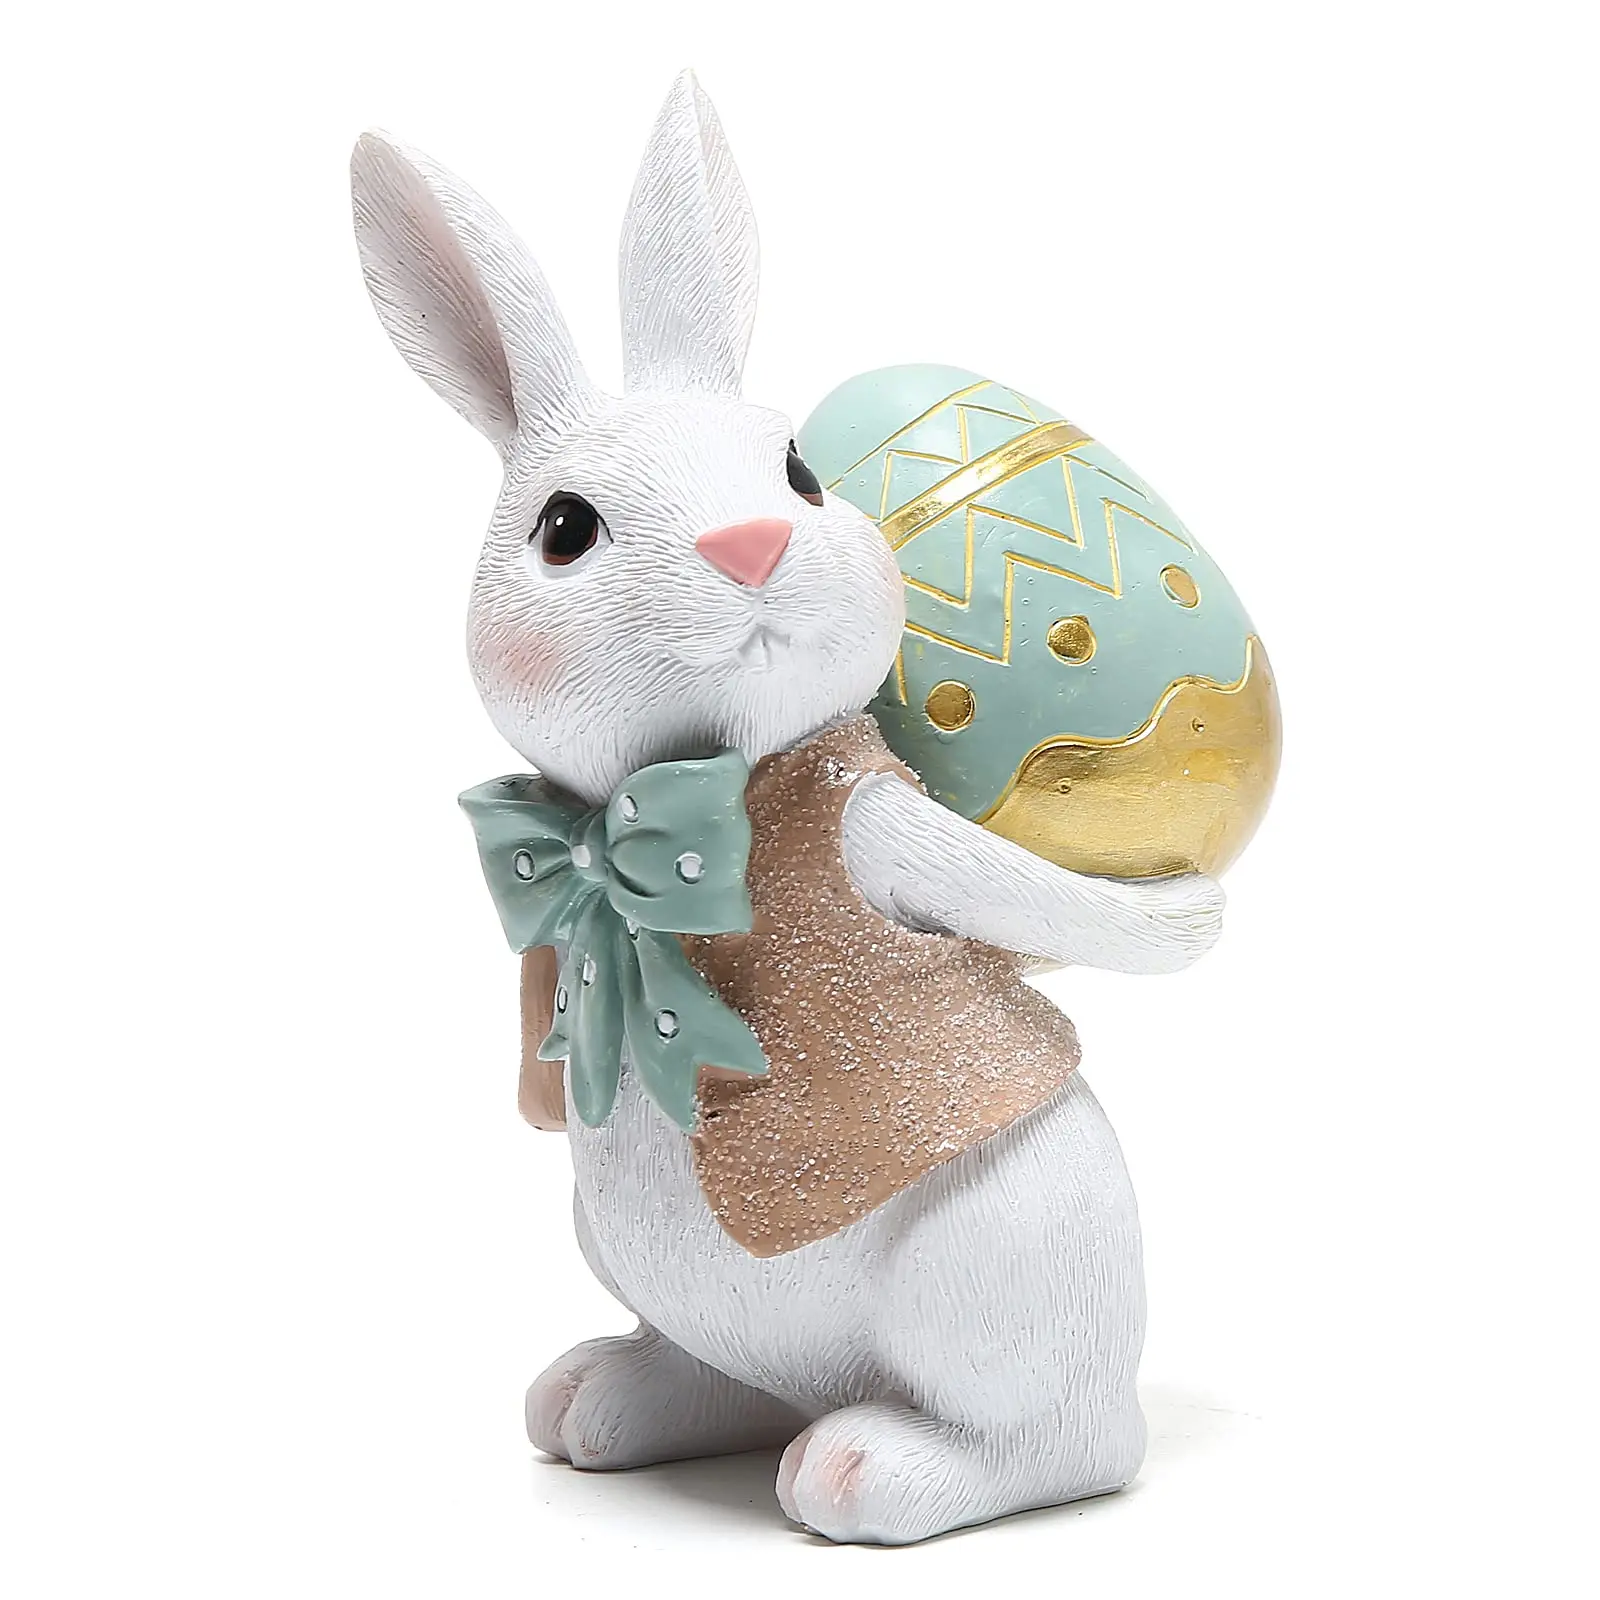 

5.5 INCH Polyresin Bunny Rabbit EGG Decorations Spring Easter Decors Figurines Tabletopper For Party Home Holiday Cute Gifts